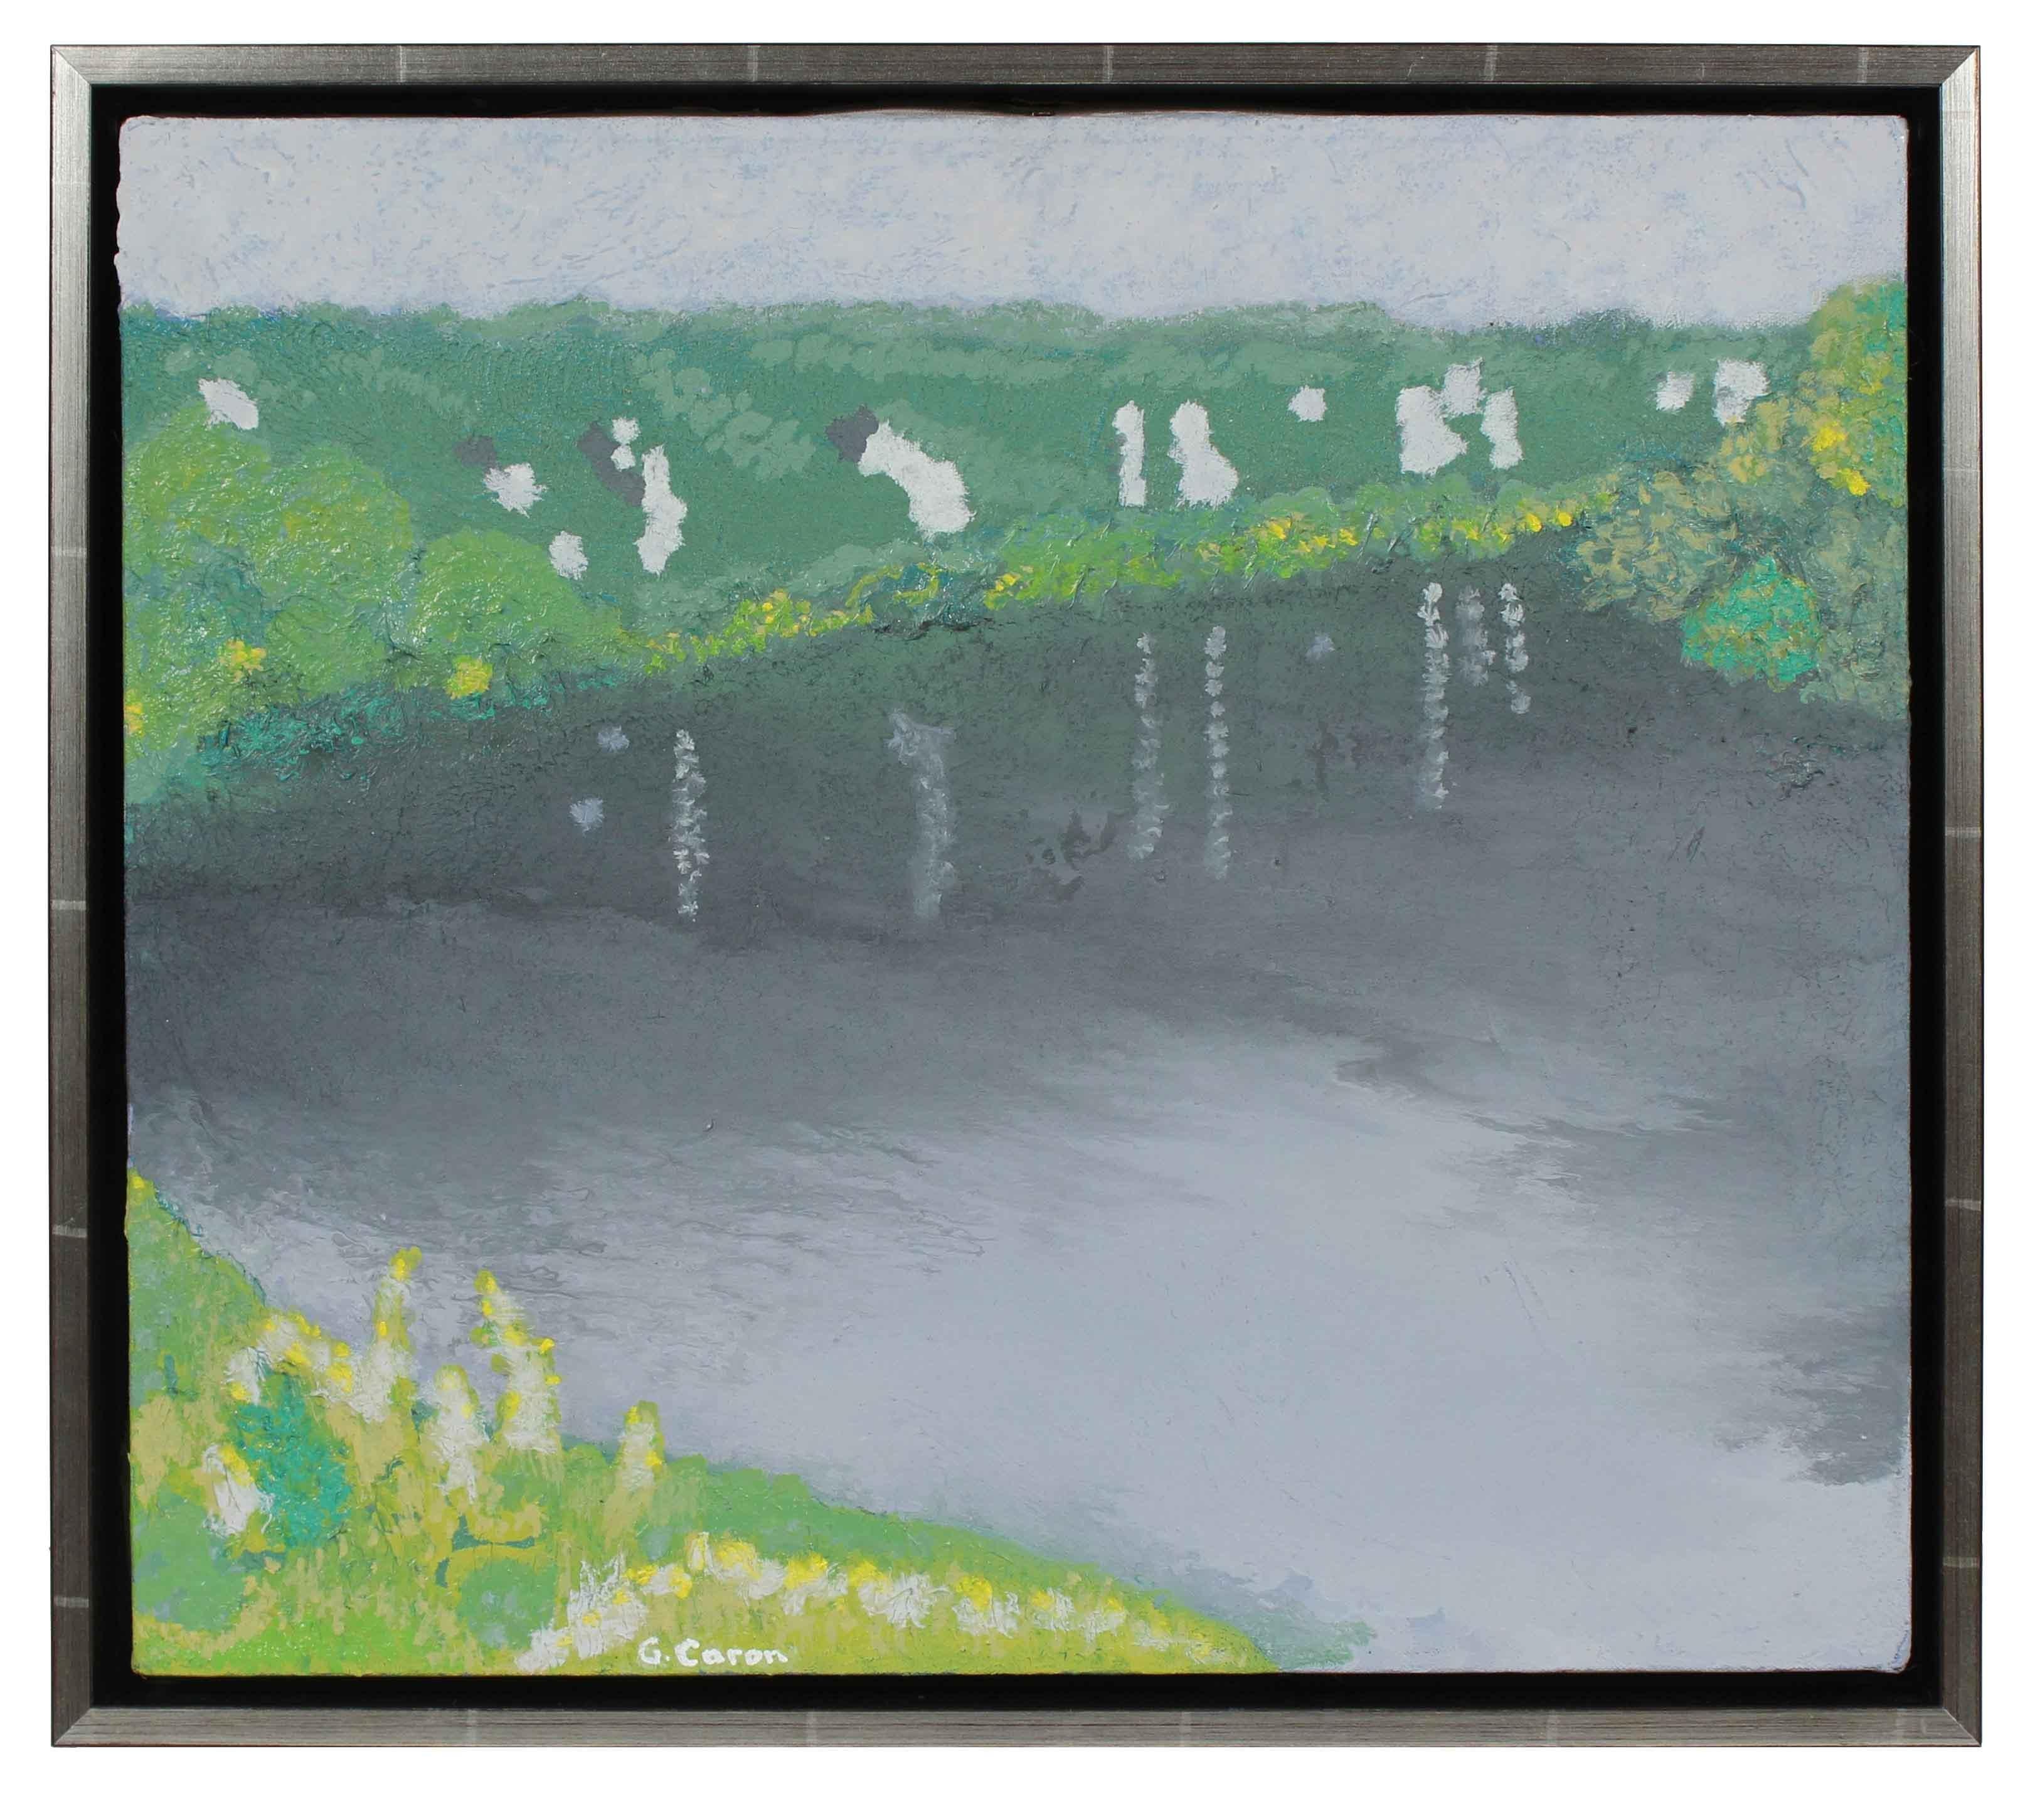 Gaétan Caron Landscape Painting - "The Seine River Near Giverny" French Landscape in Oil, 2017